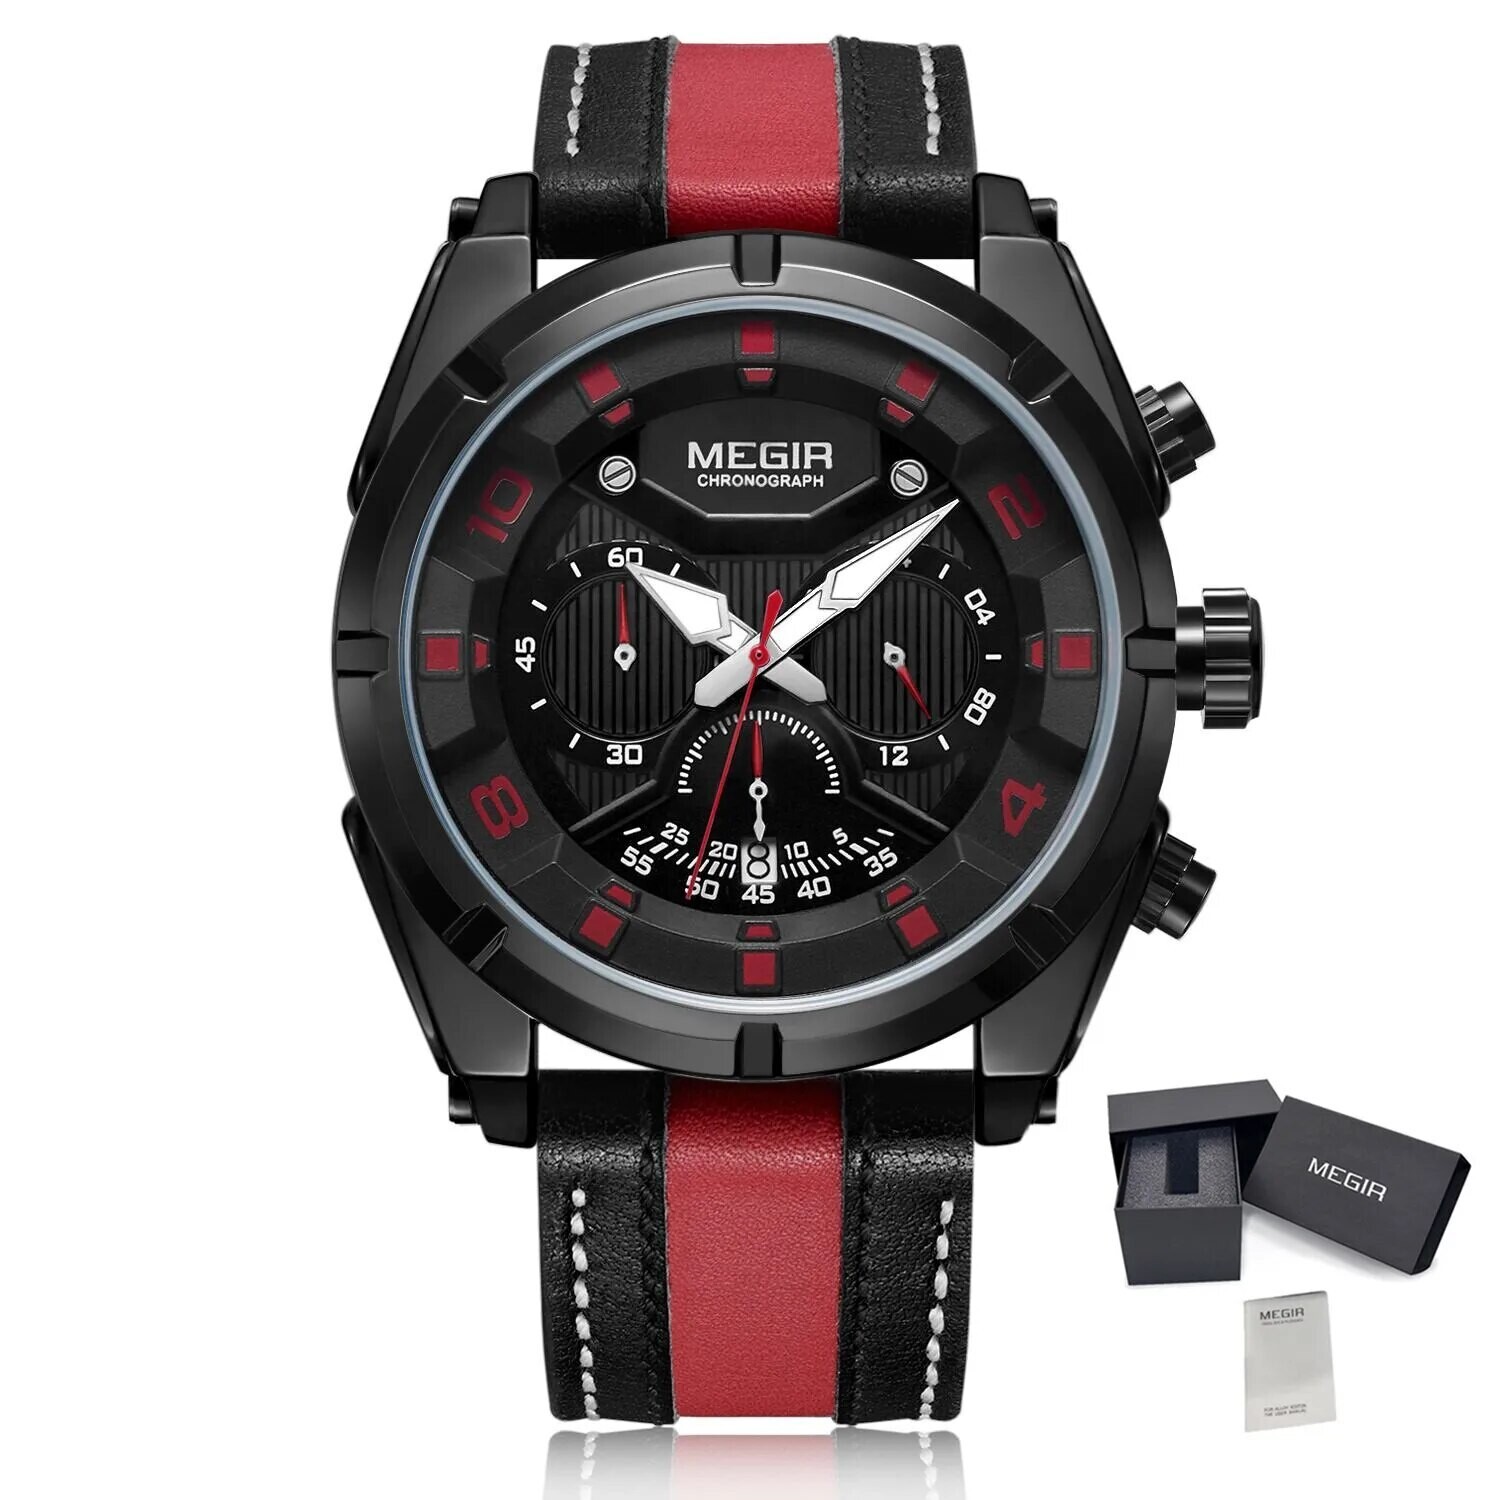 MEGIR Chronograph Sport Watch Men Quartz Wristwatches Clock Fashion Leather Army Military Watches Hour Time Relogio Masculino, Color: Red